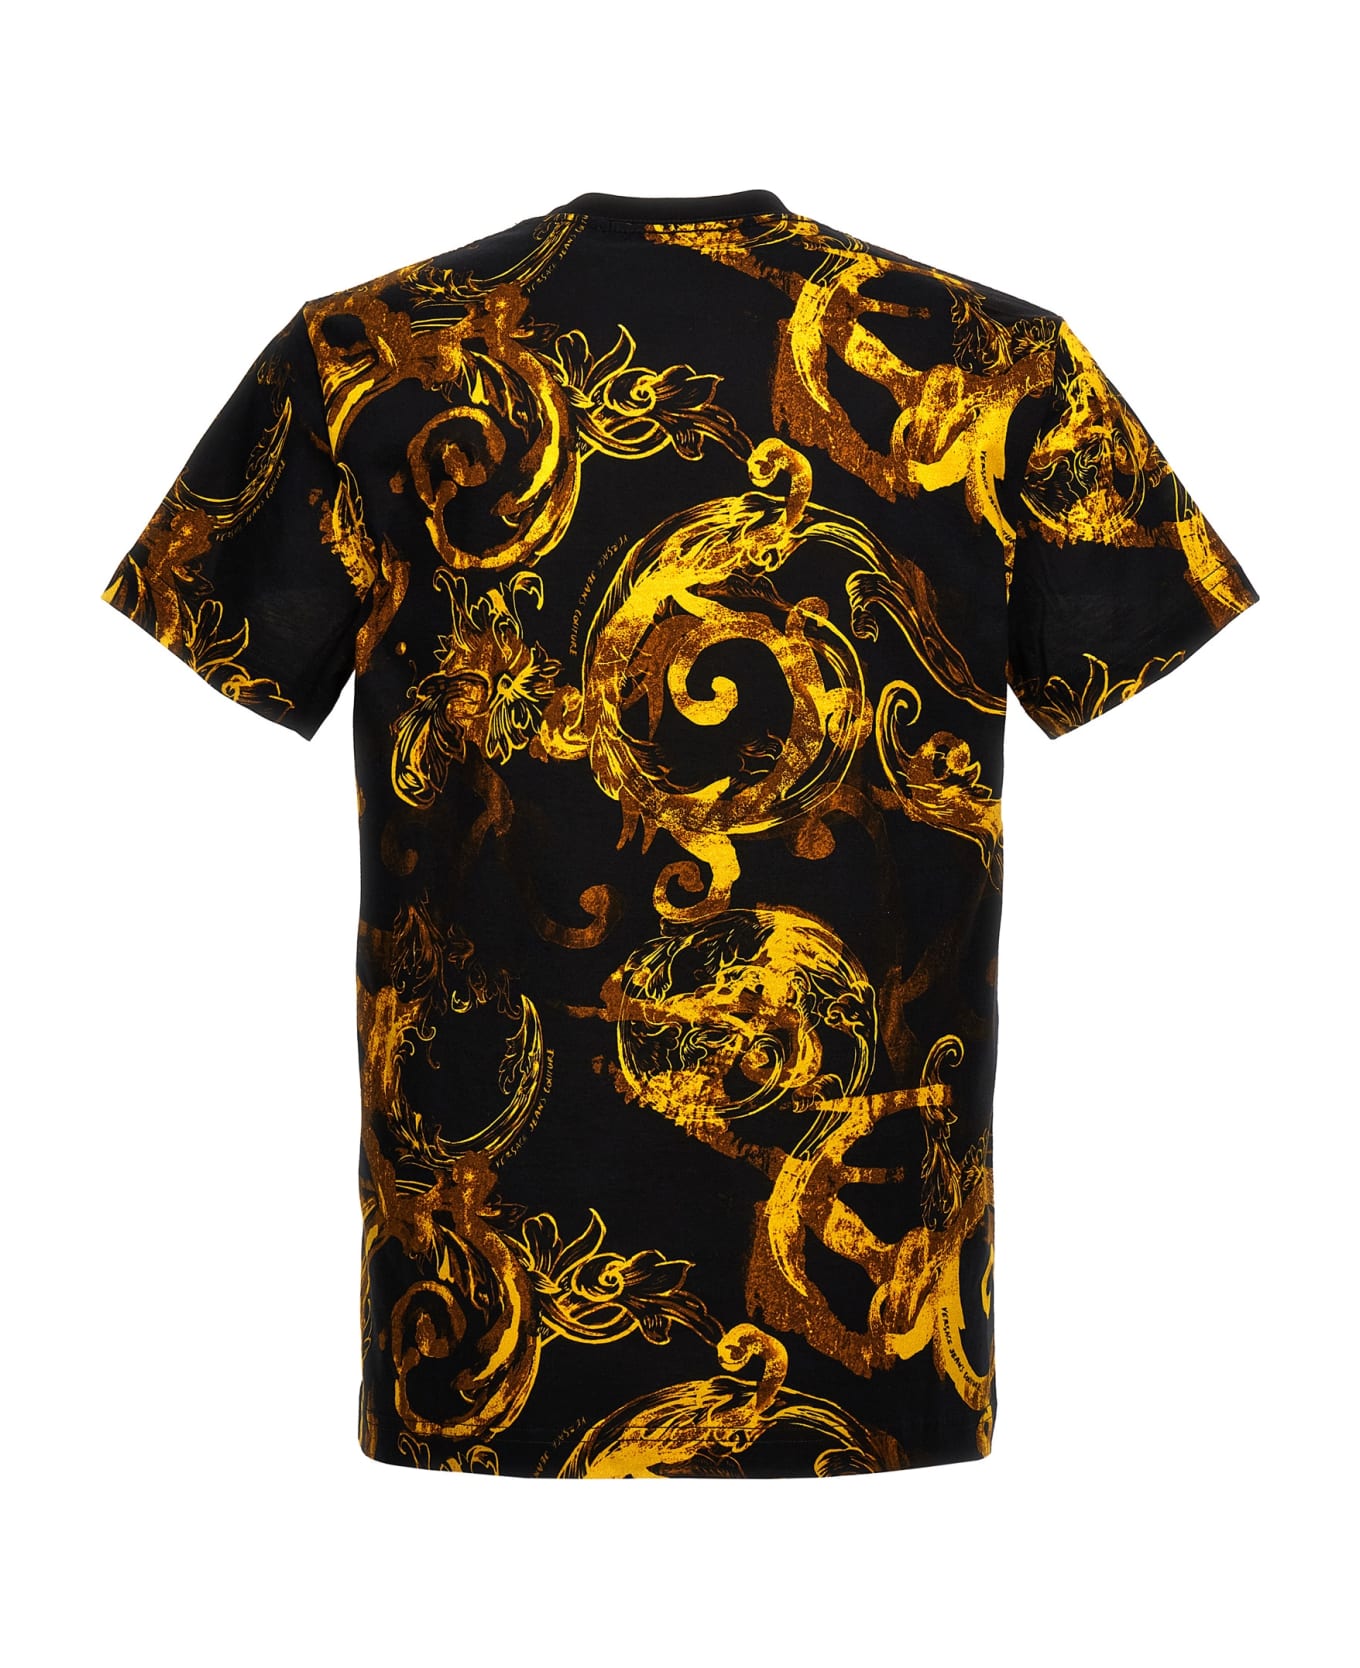 Versace Jeans Couture All Over Print T-shirt - BLACK/GOLD シャツ